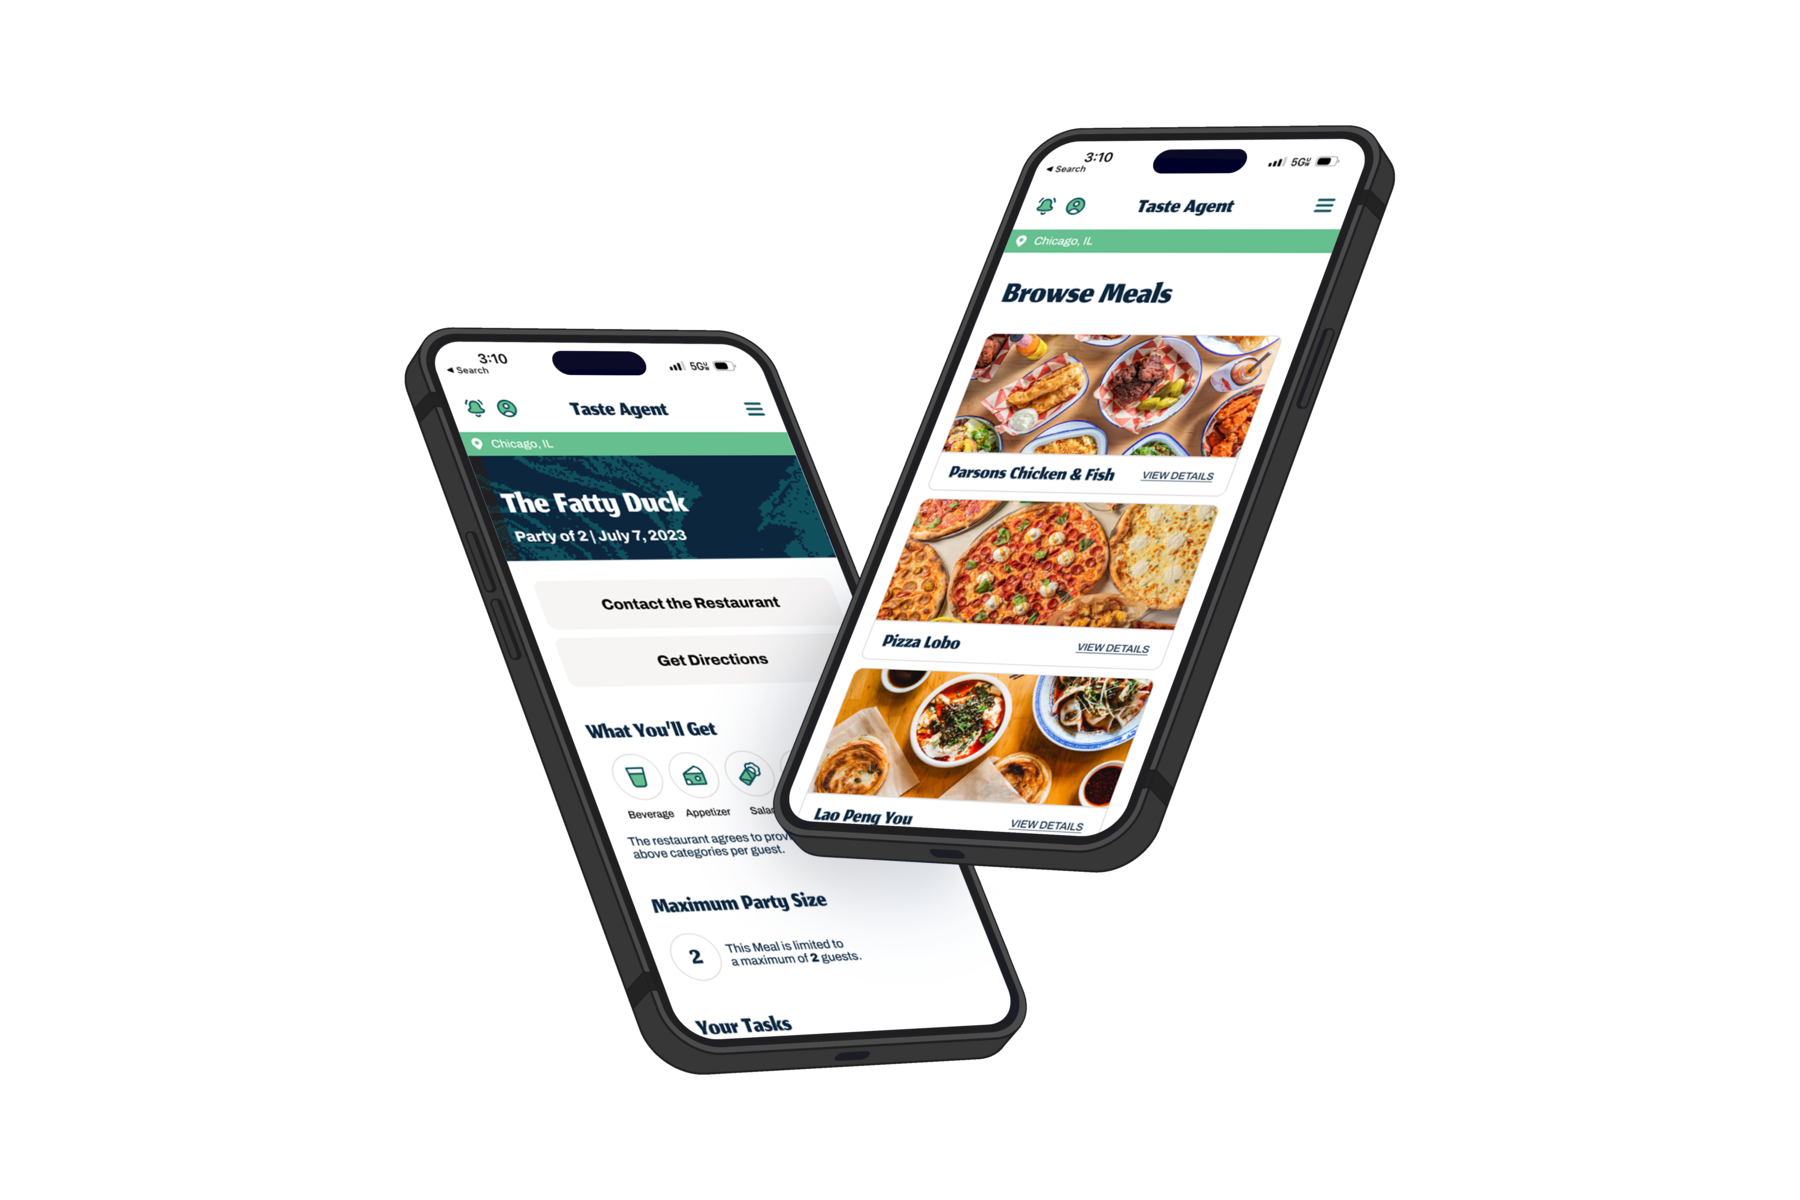 Portrayal of the Taste Agent application on a pair of phones. One phone has a page labeled 'Browse Meals' and shows several compelling photos and meals to choose from. The other phone has a page labeled 'The Fatty Duck' and shows information about a meal booking, including the items that will be received, party size, and the booking date.